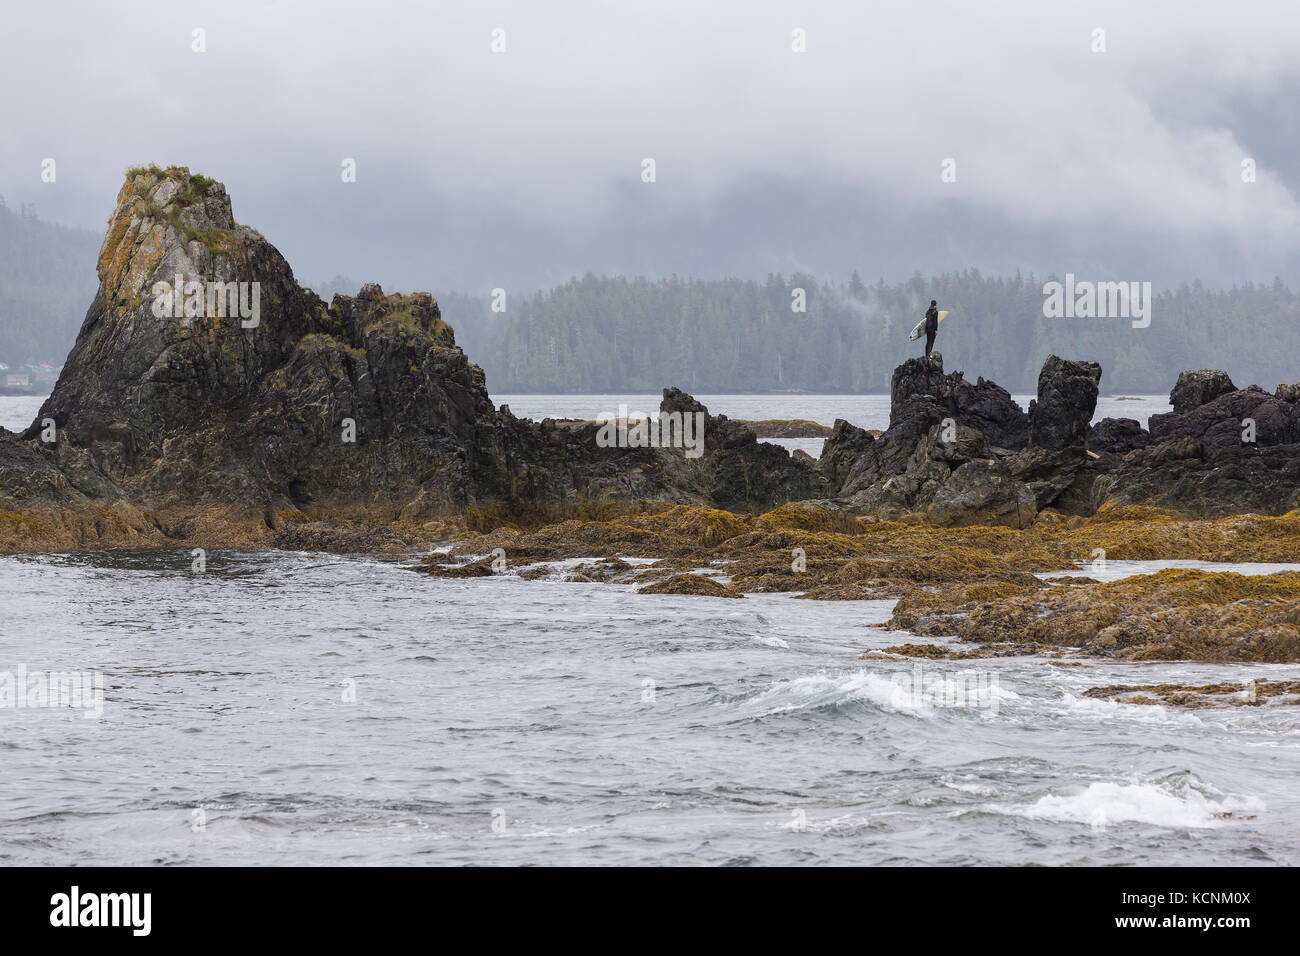 A surfer gazes at headlands looking for surf break on Spring Island.  Kyuquot, Vancouver Island, British Columbia, Canada. Stock Photo